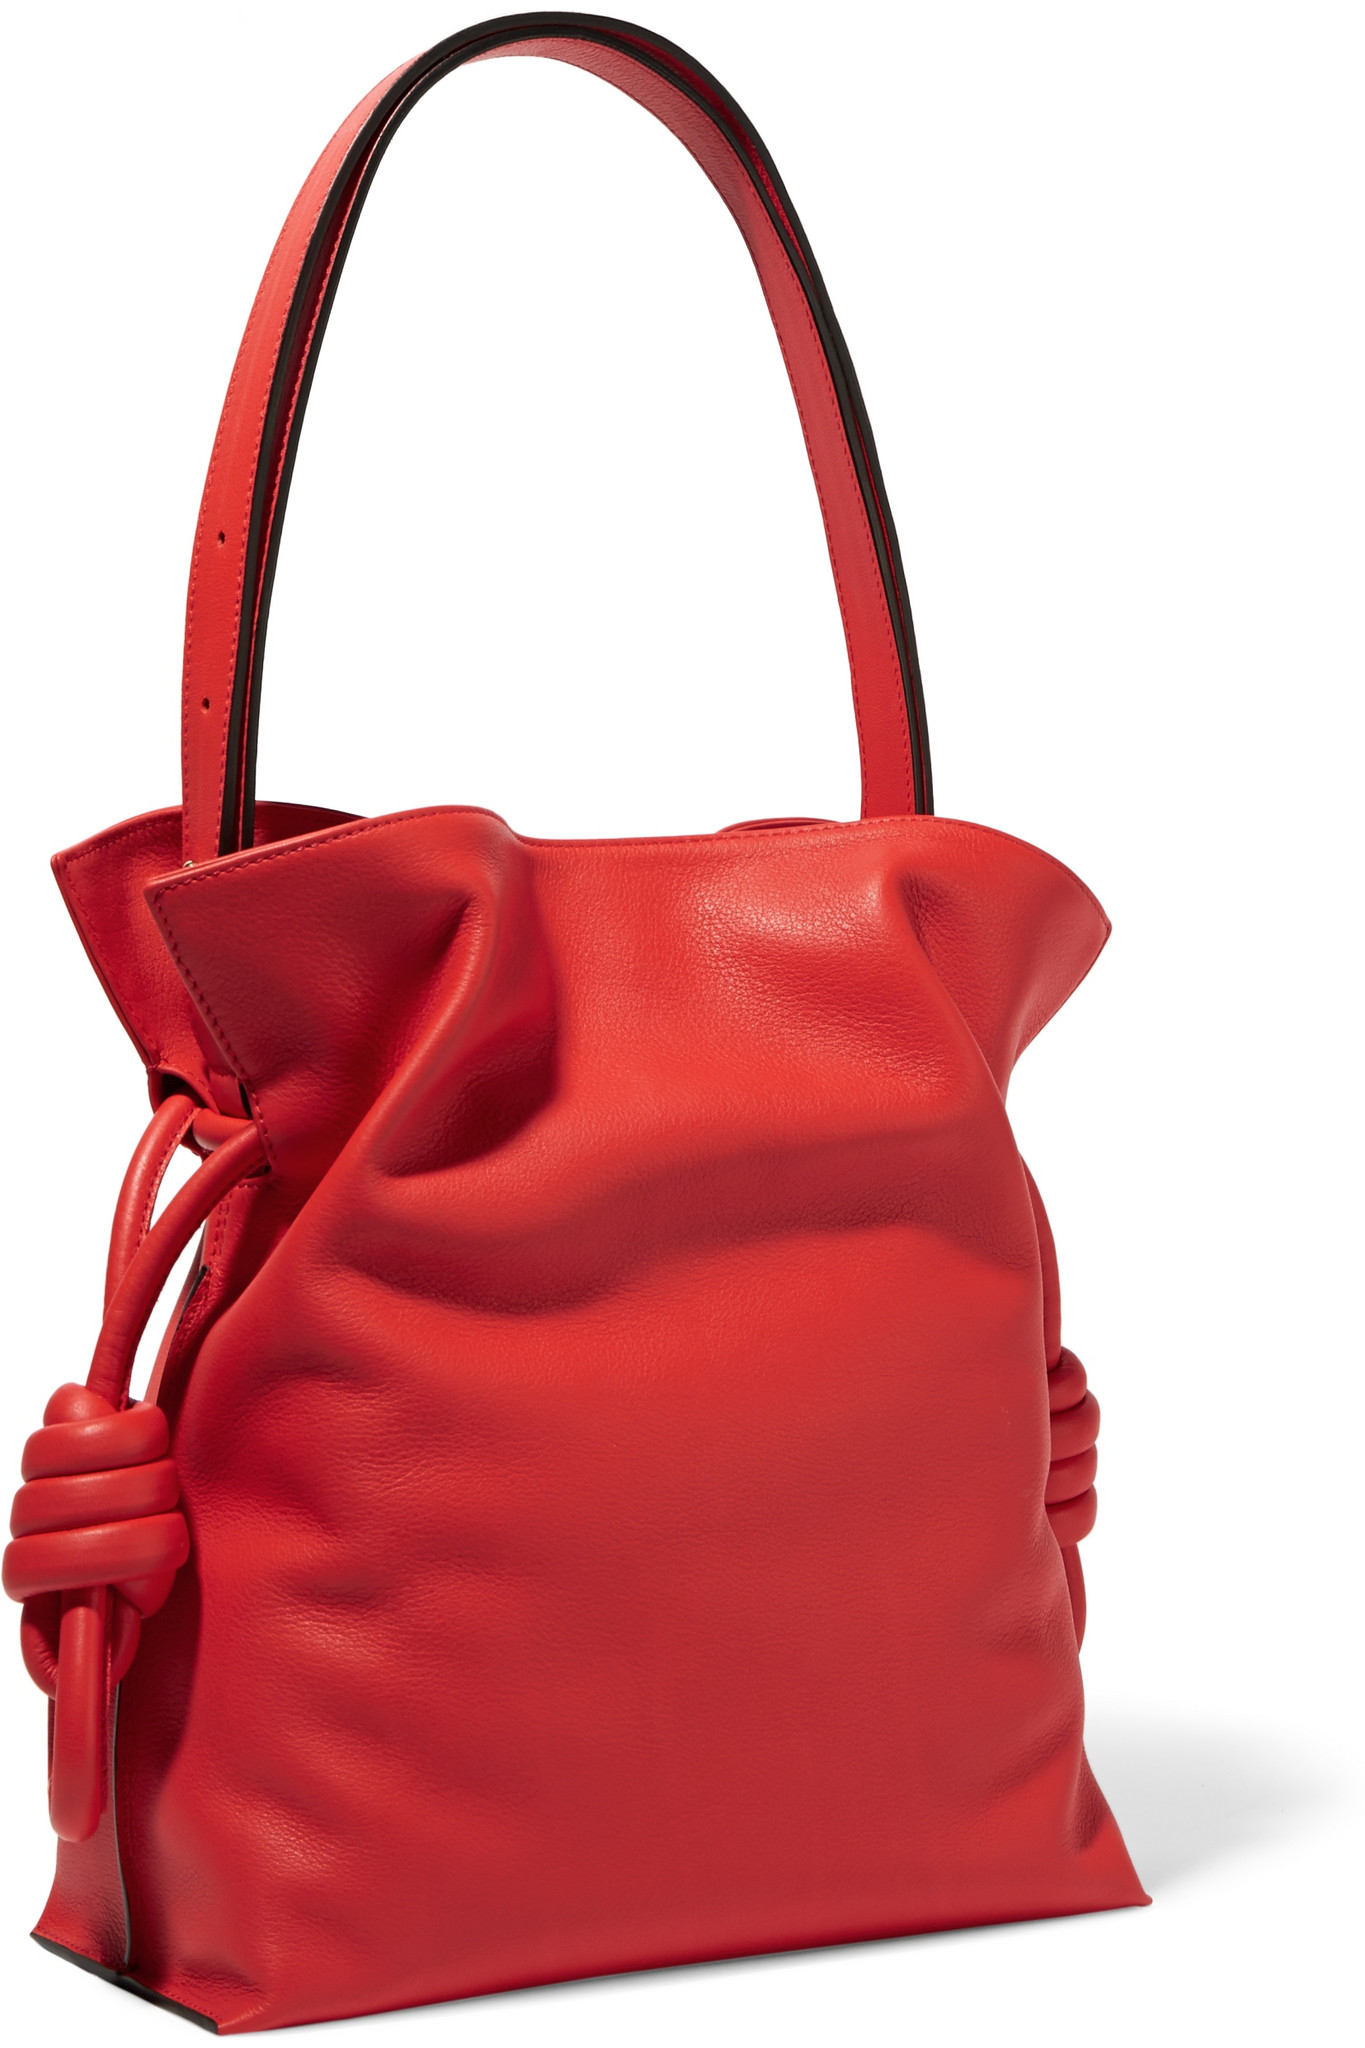 Lyst - Loewe Flamenco Knot Small Leather Shoulder Bag in Red